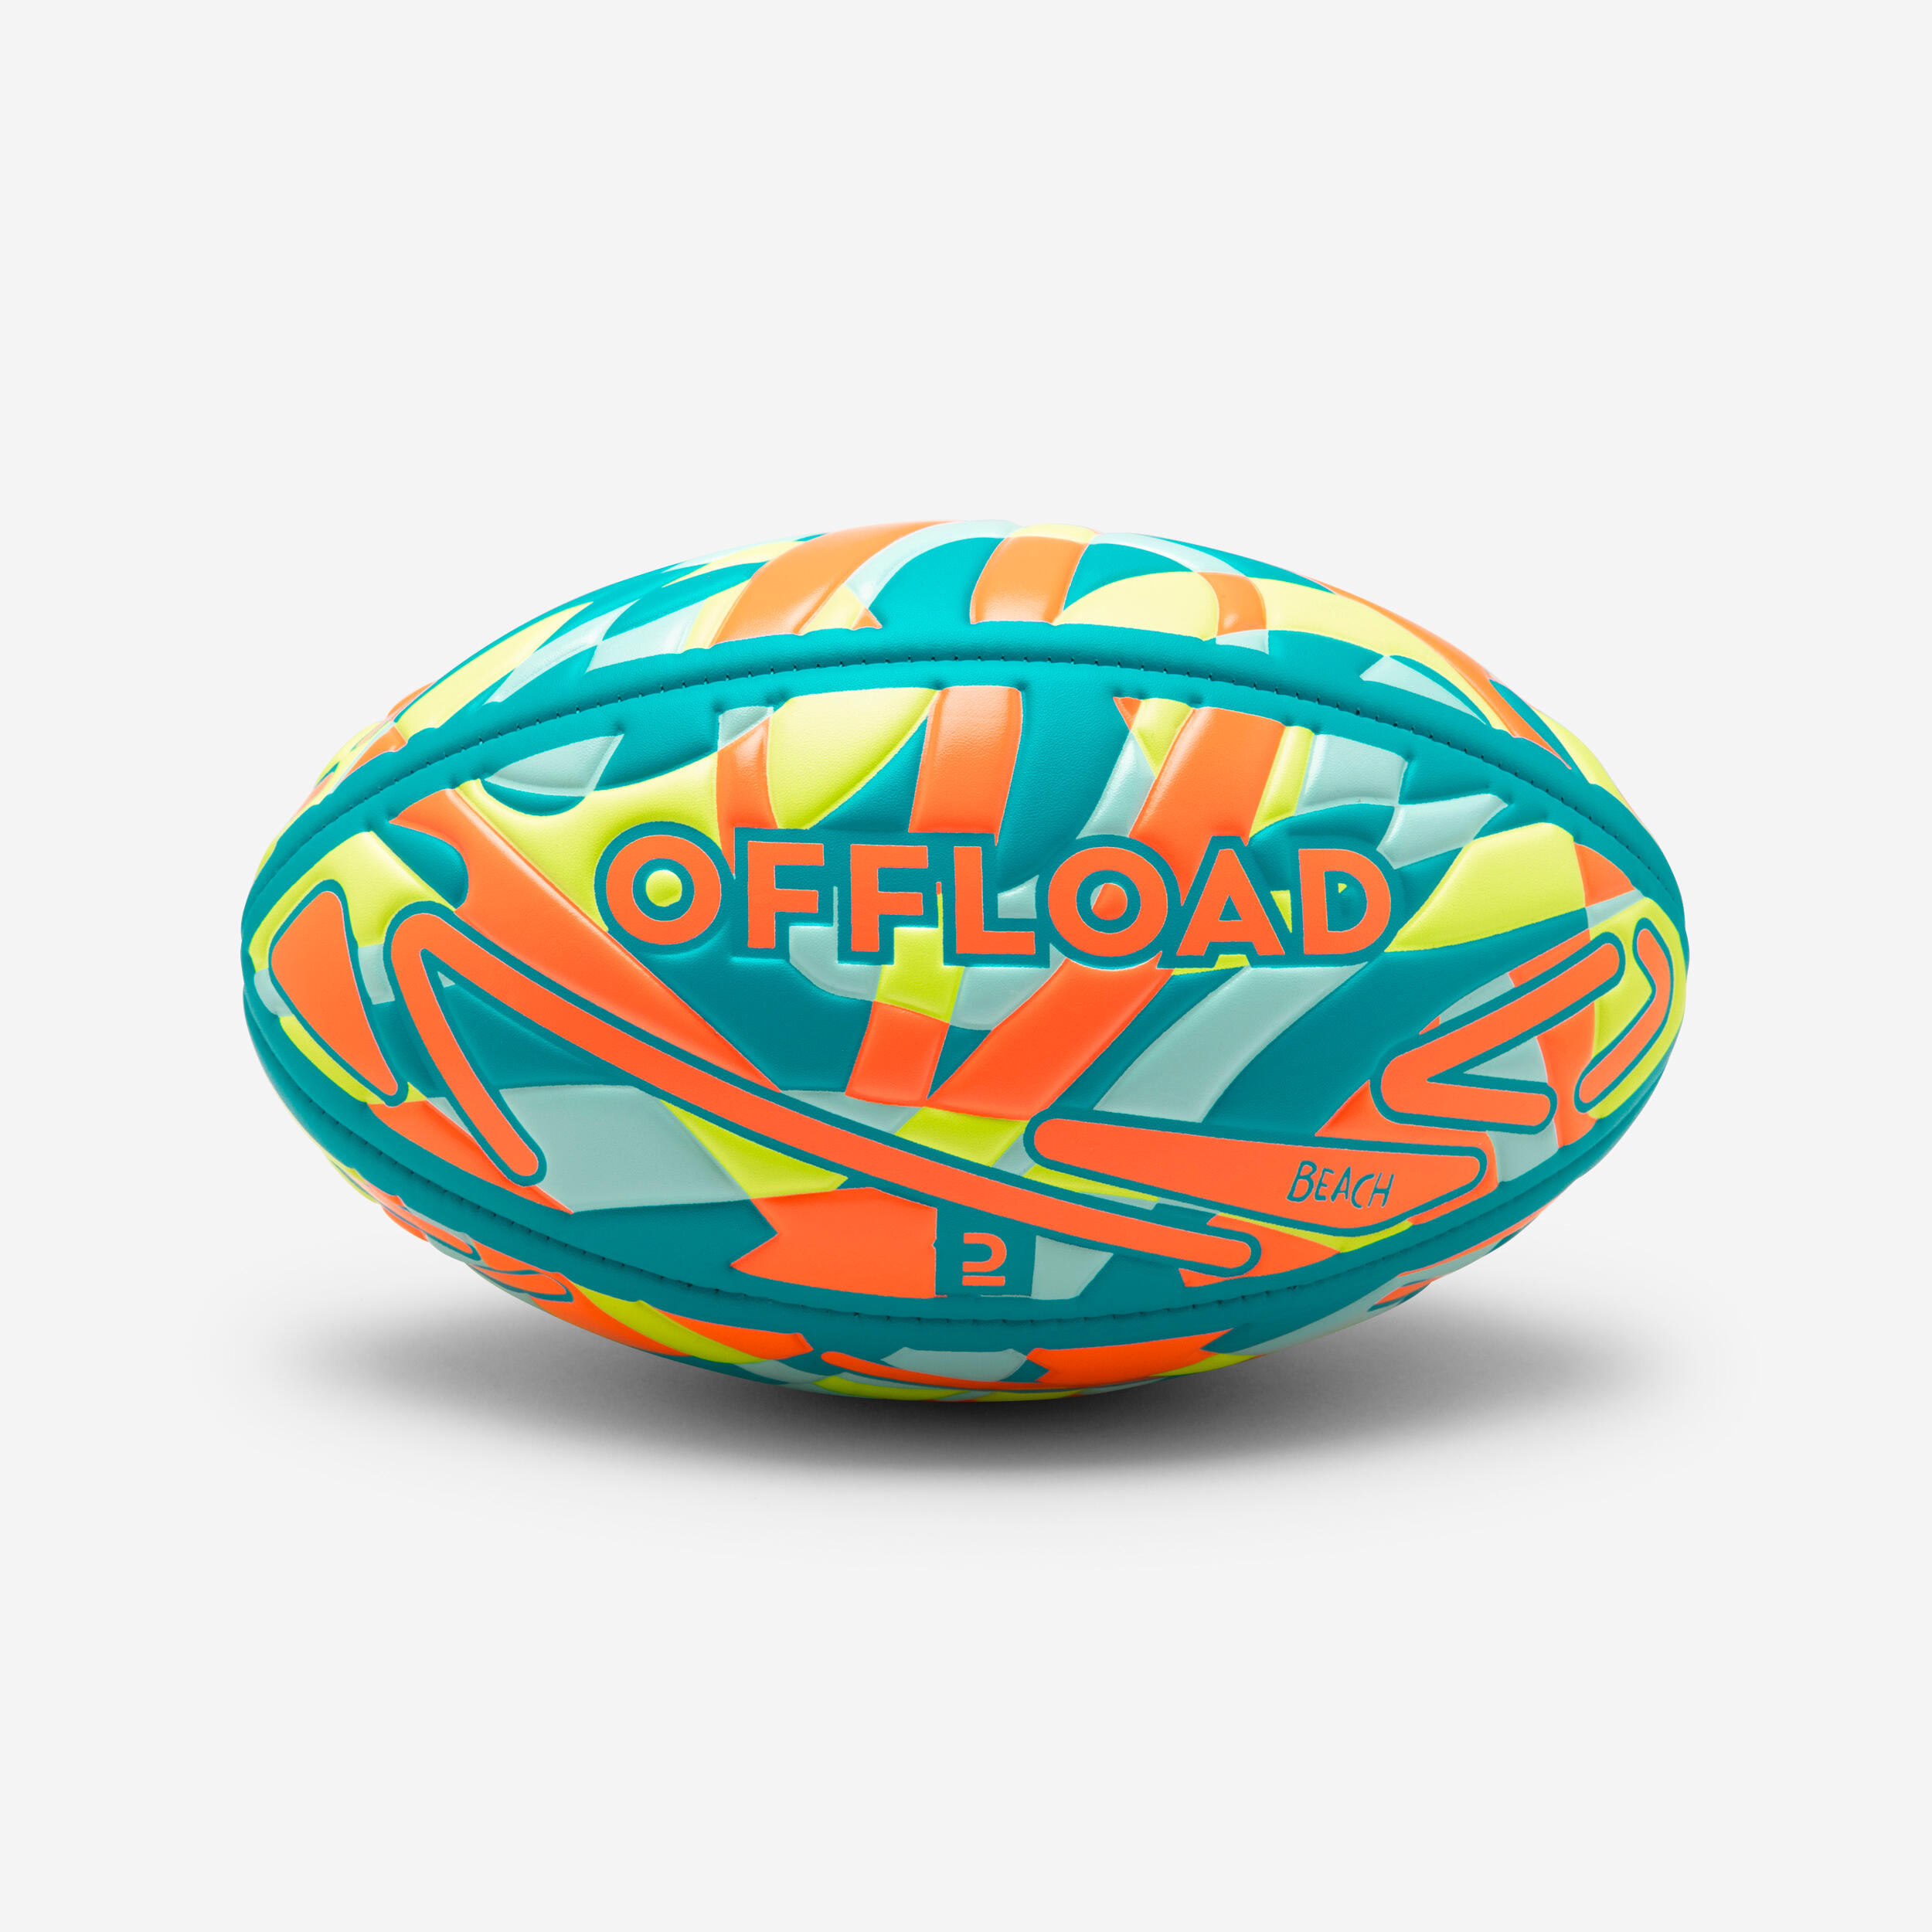 OFFLOAD Beach Rugby Ball R100 Midi City Size 1 - Blue/Yellow/Orange